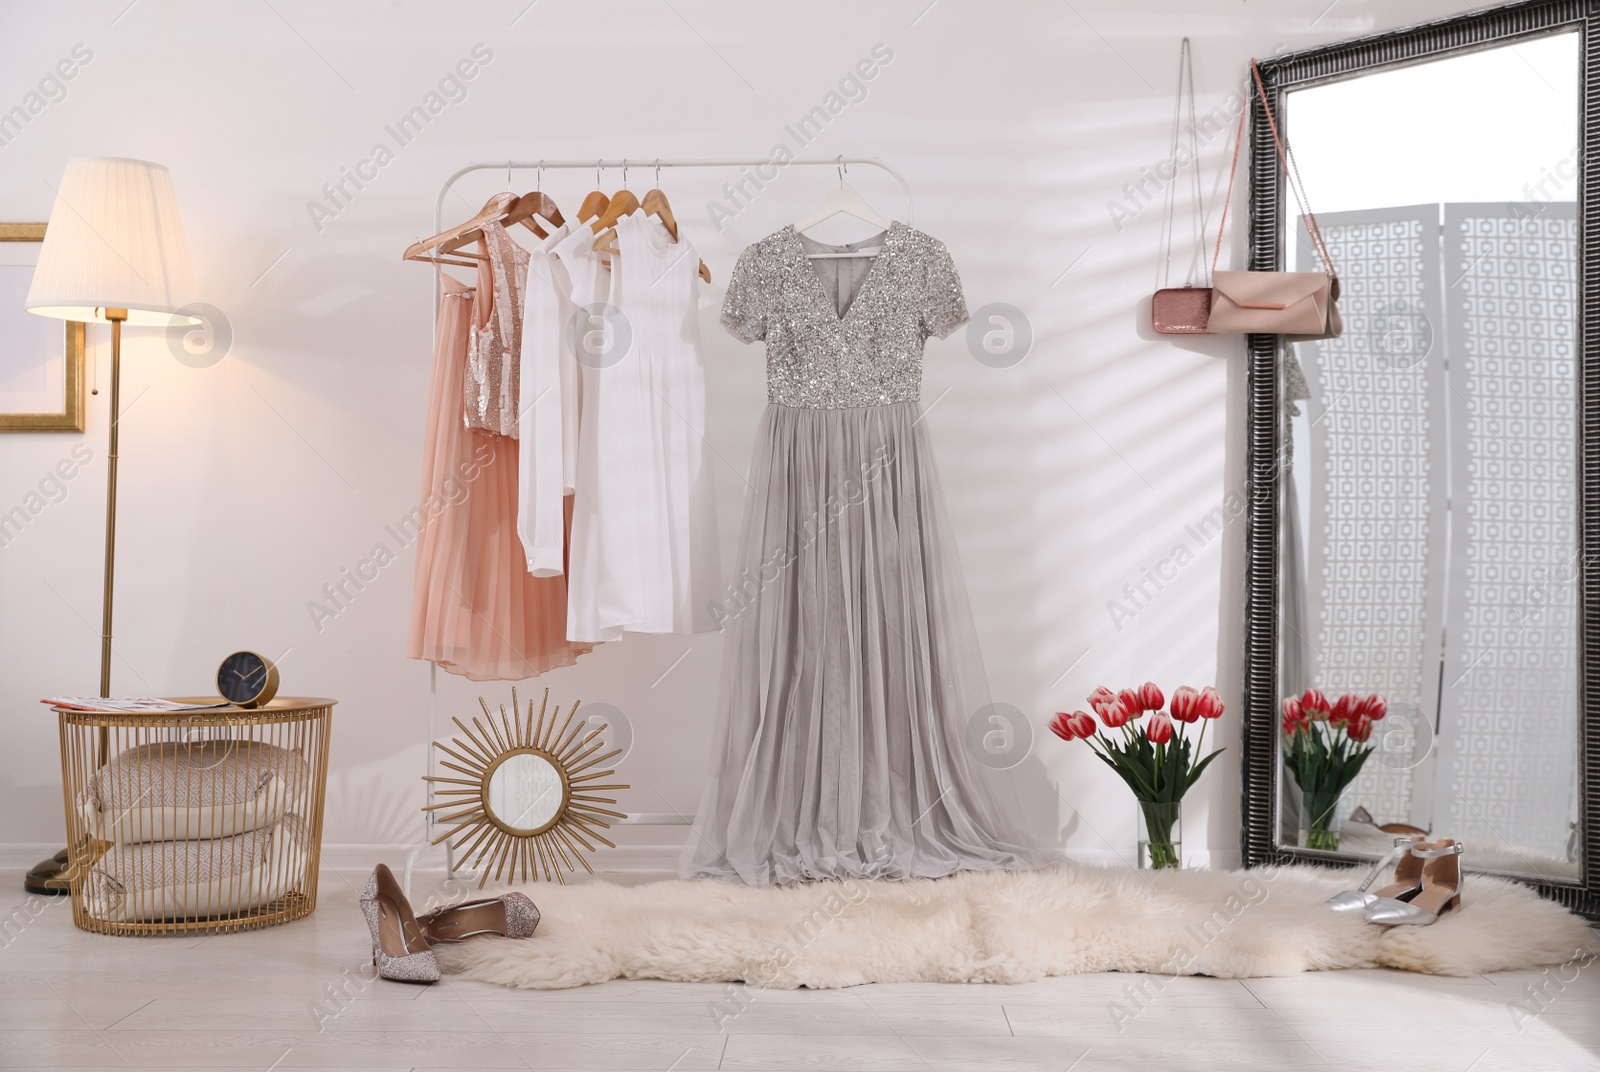 Photo of Rack with stylish women's clothes and mirror indoors. Interior design